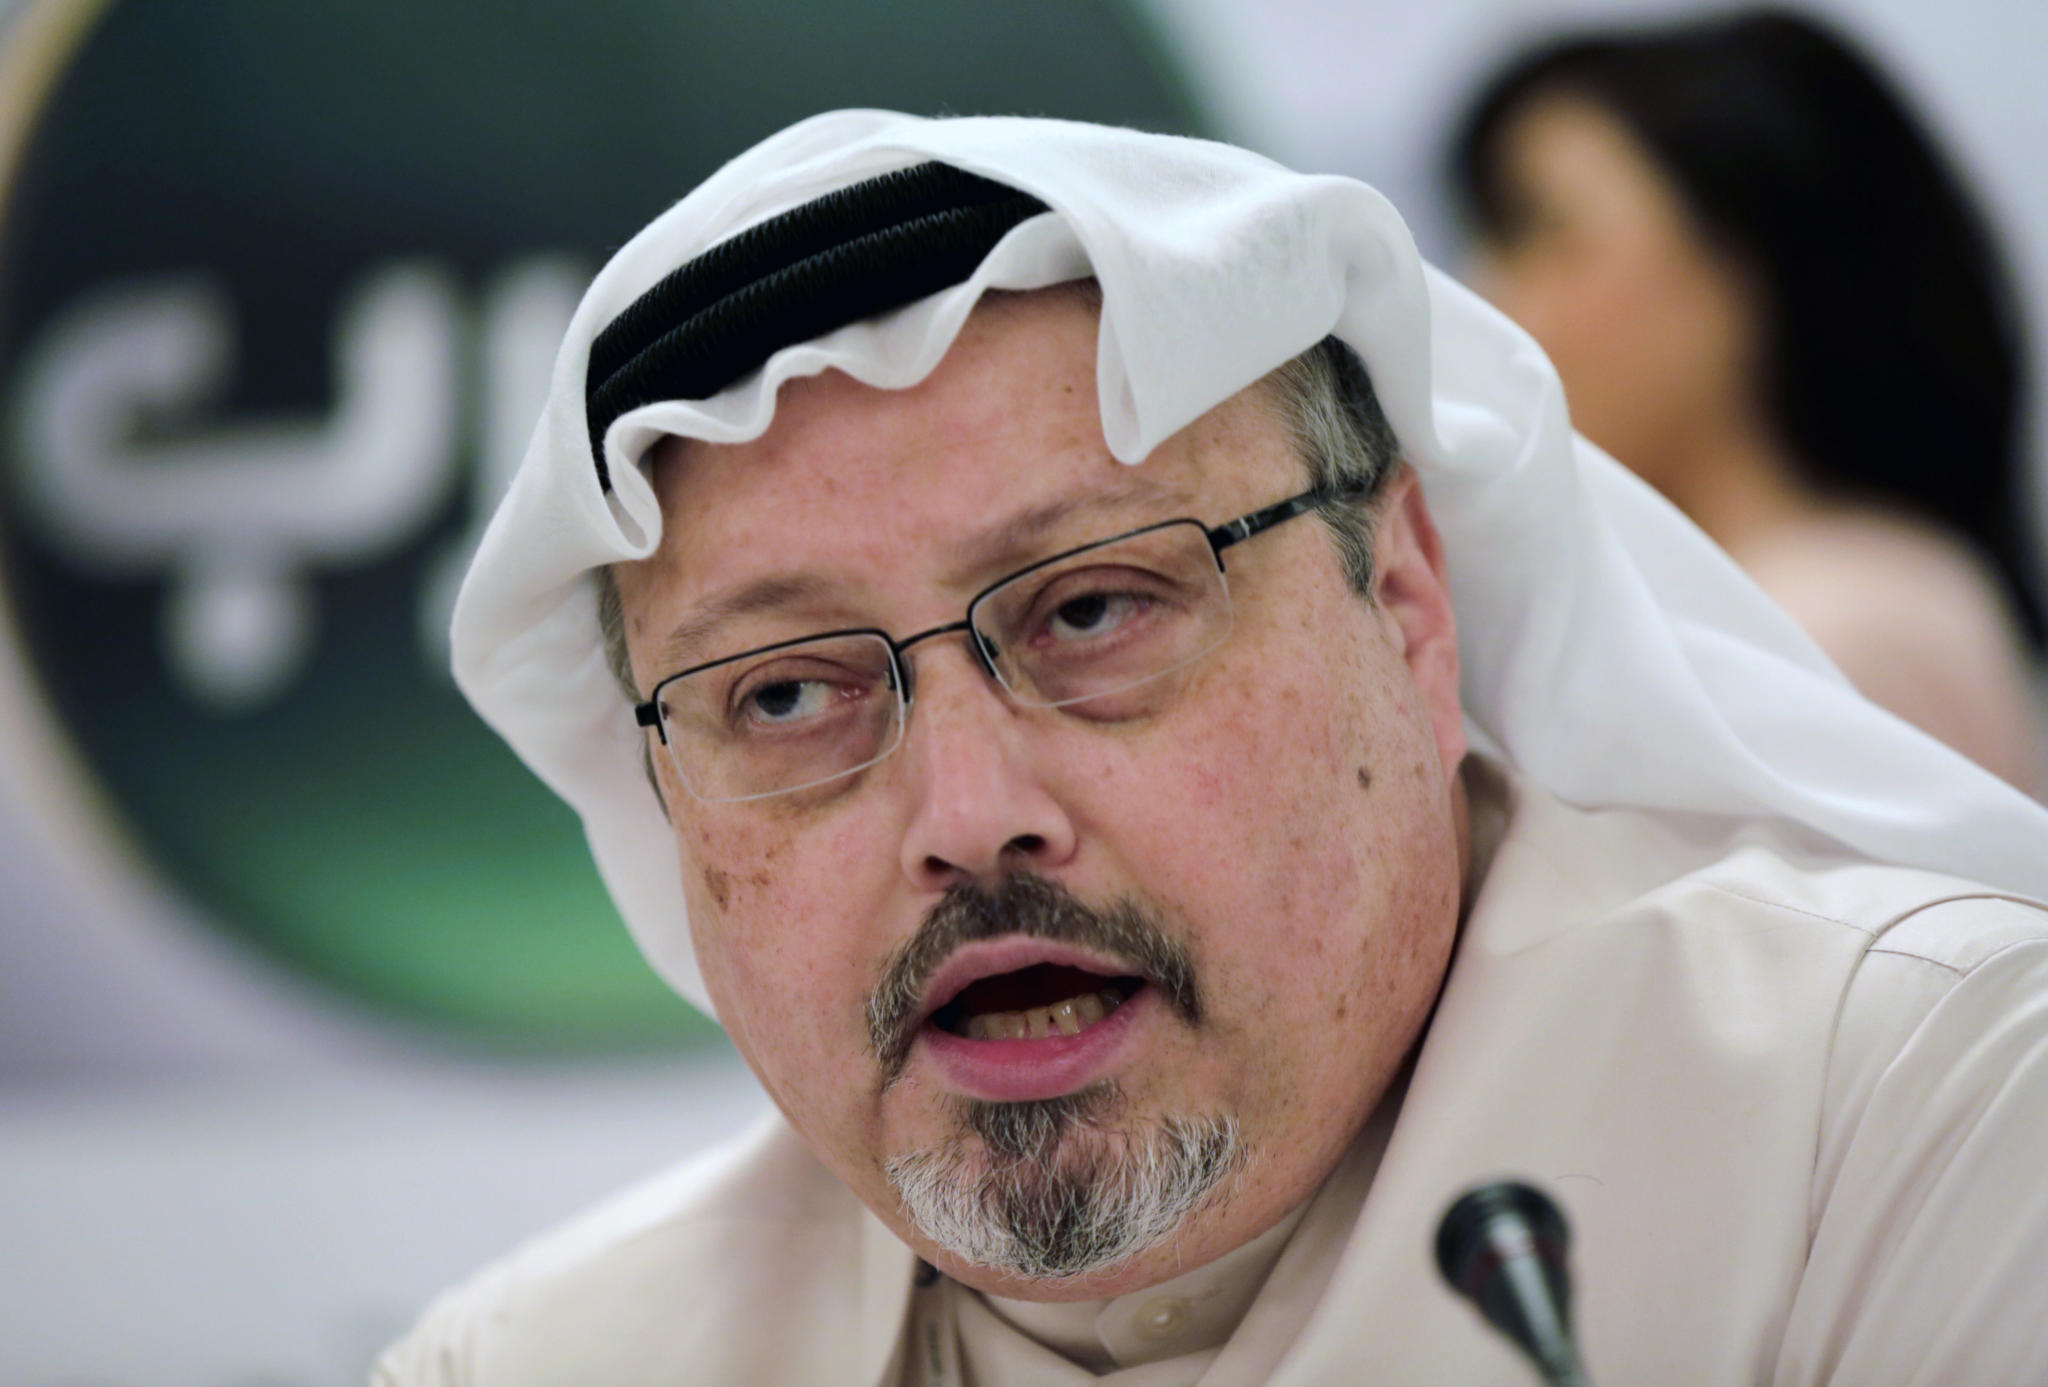 FILE - In this Feb. 1, 2015, file photo, Saudi journalist Jamal Khashoggi speaks during a press conference in Manama, Bahrain. The disappearance of Khashoggi, during a visit to his country’s consulate in Istanbul on Oct. 2, 2018, raises a dark question for anyone who dares criticize governments or speak out against those in power: Will the world have their back? (AP Photo/Hasan Jamali, File)